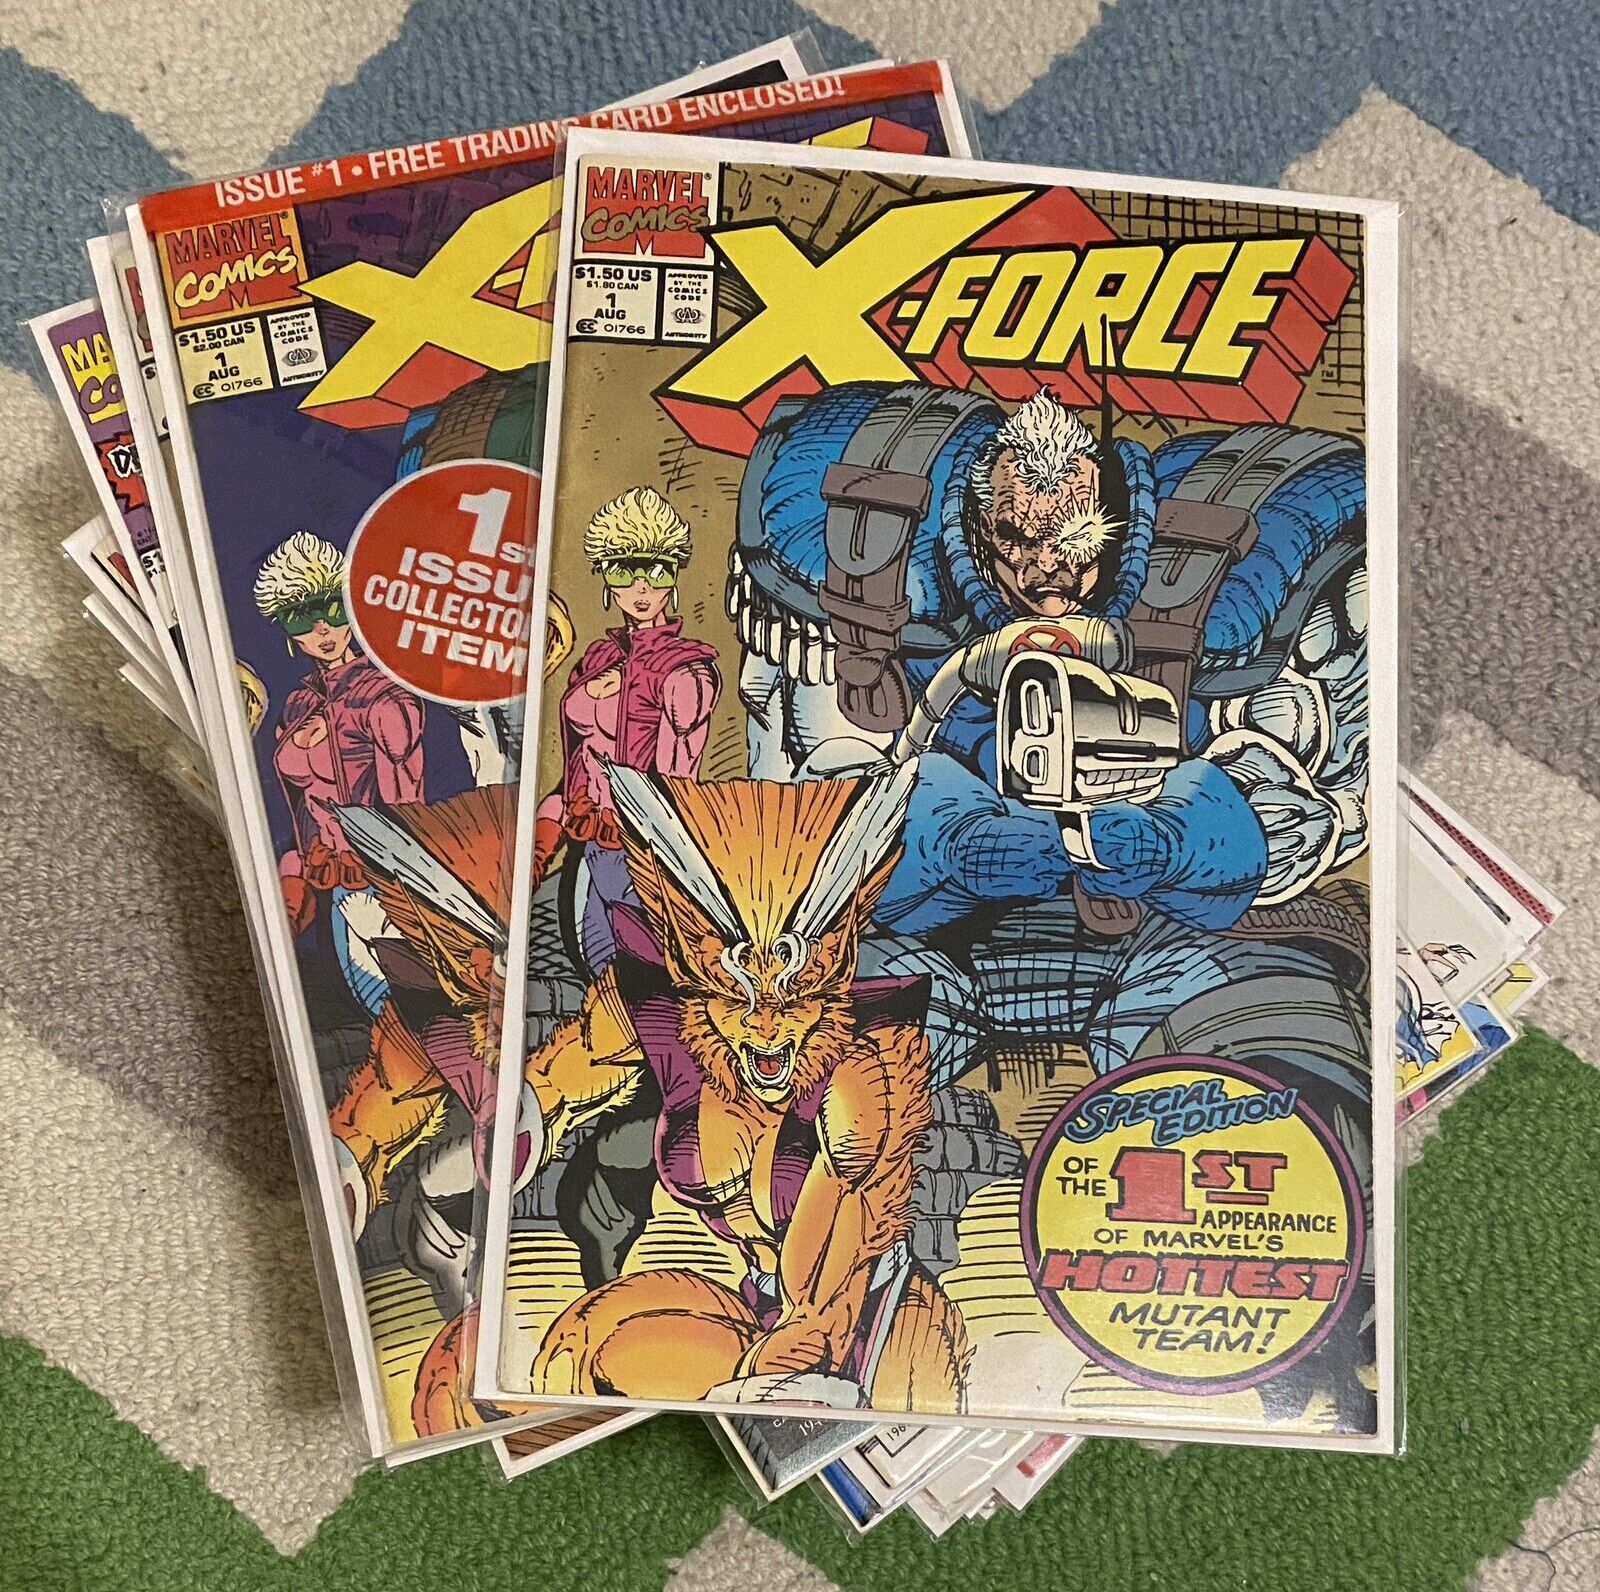 HUGE X-FORCE LOT 57 Issues $1.50 per issue #1-49 + DUPES - Marvel